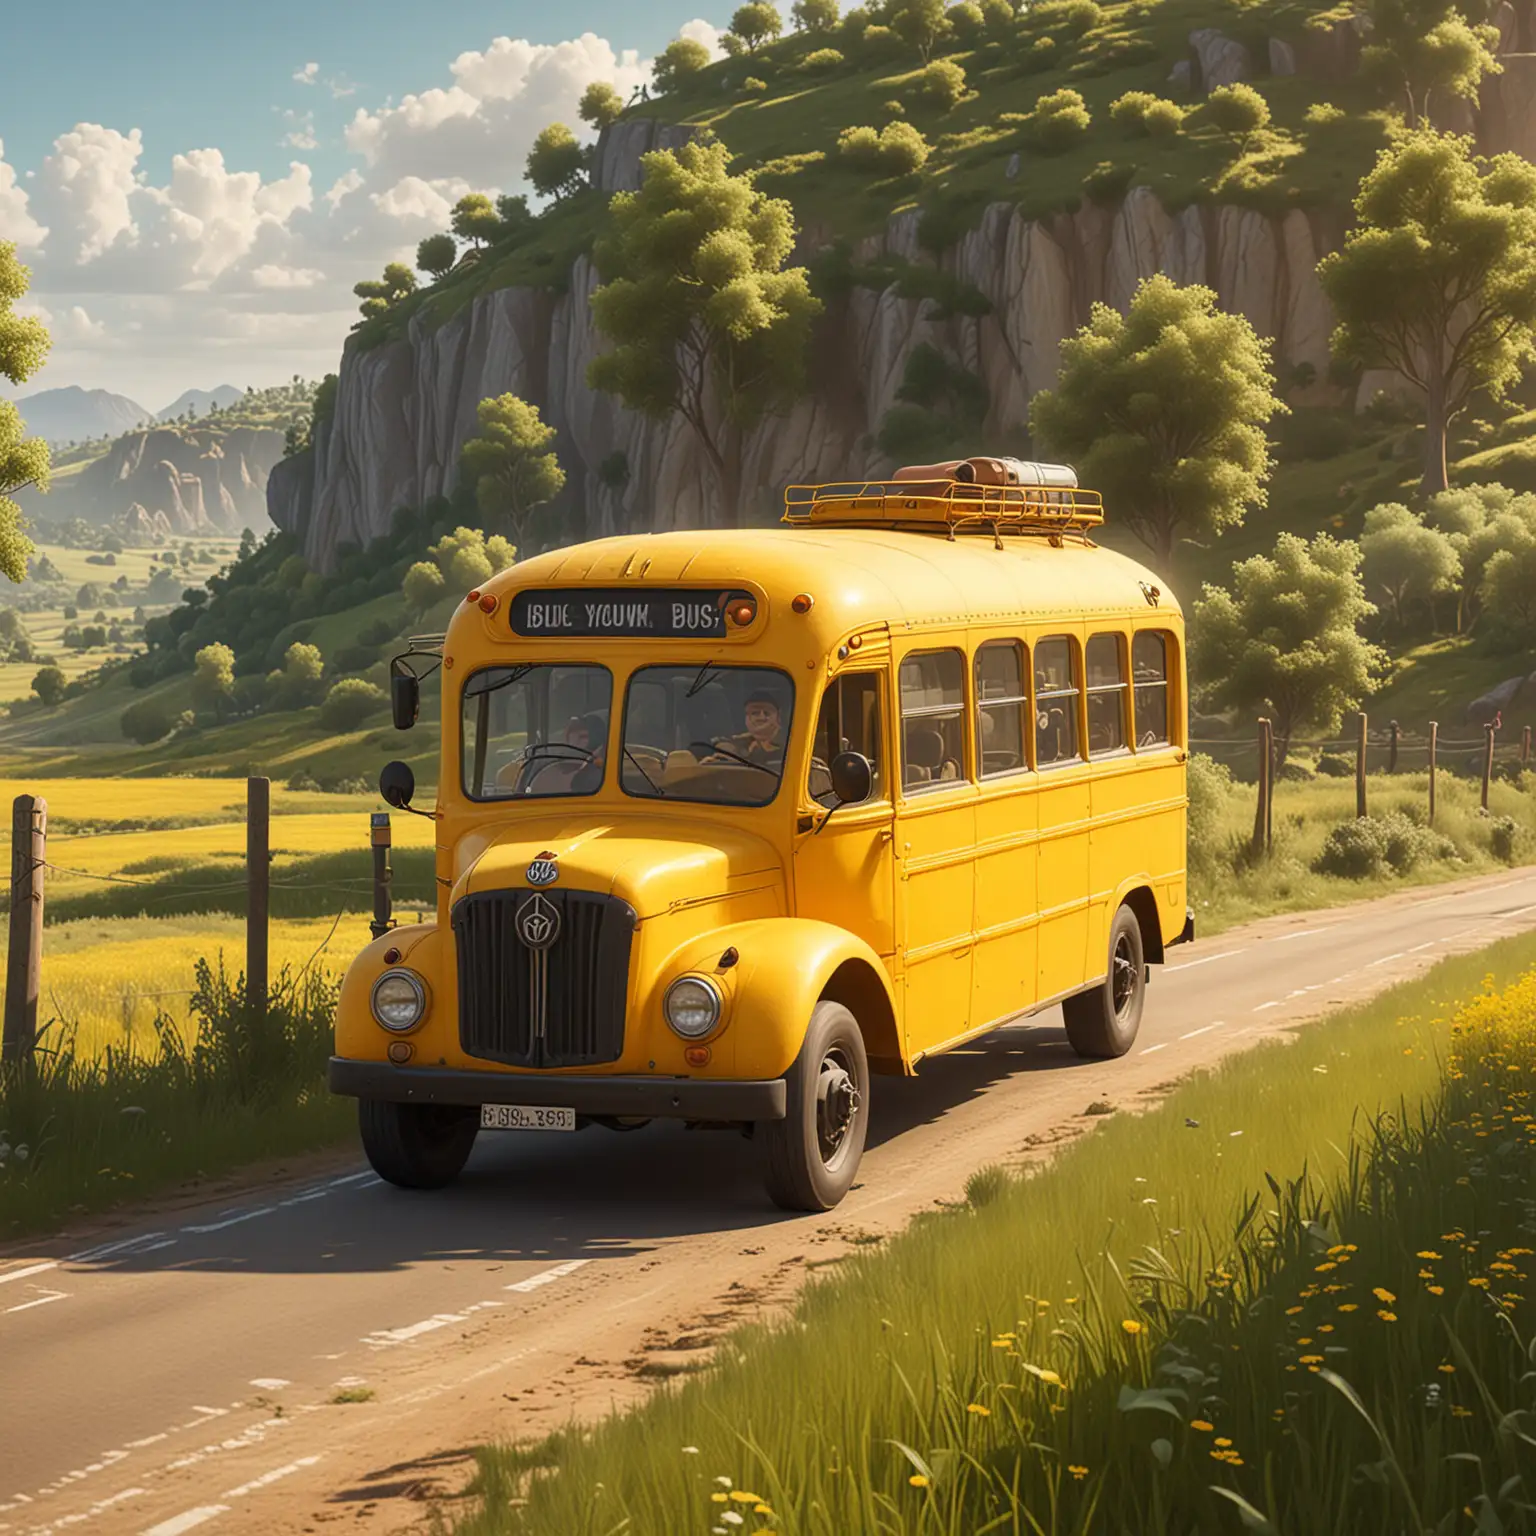 PixarStyle Animated Big Yellow Bus Journeying Through a Lush Country Landscape